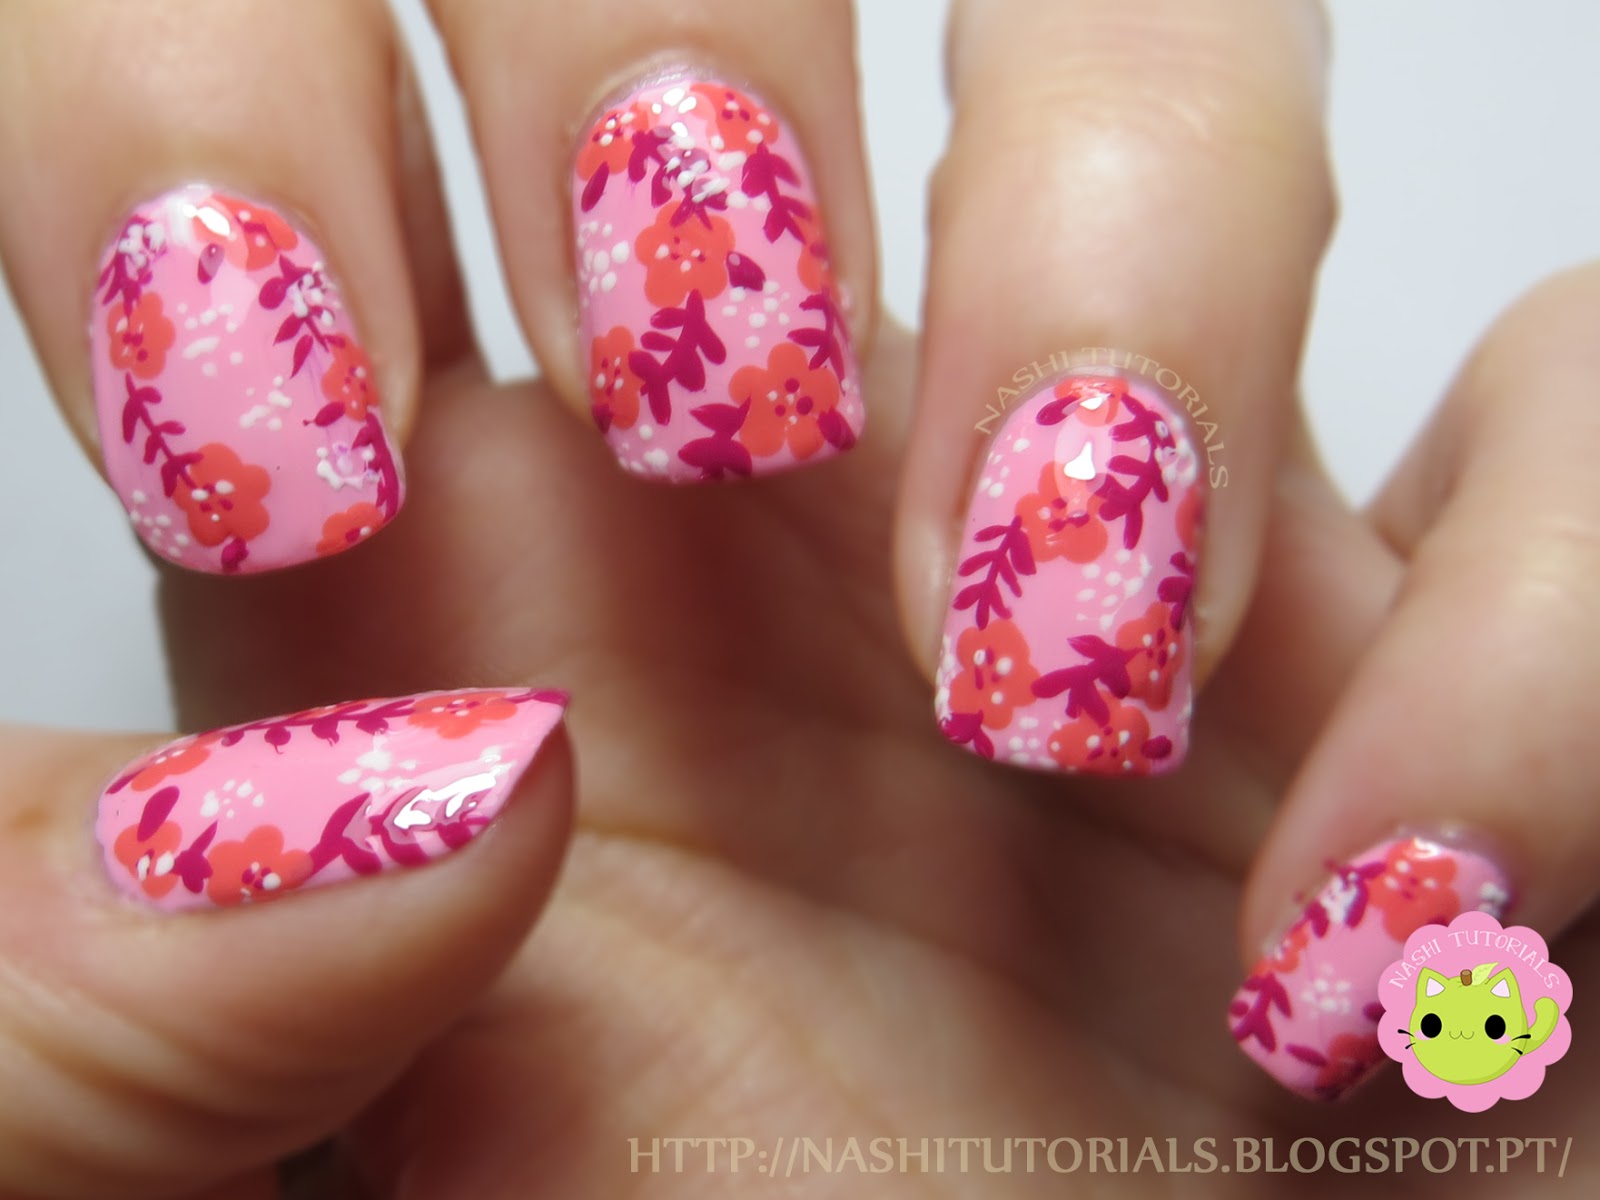 6. Pink and White Floral Nail Art - wide 3